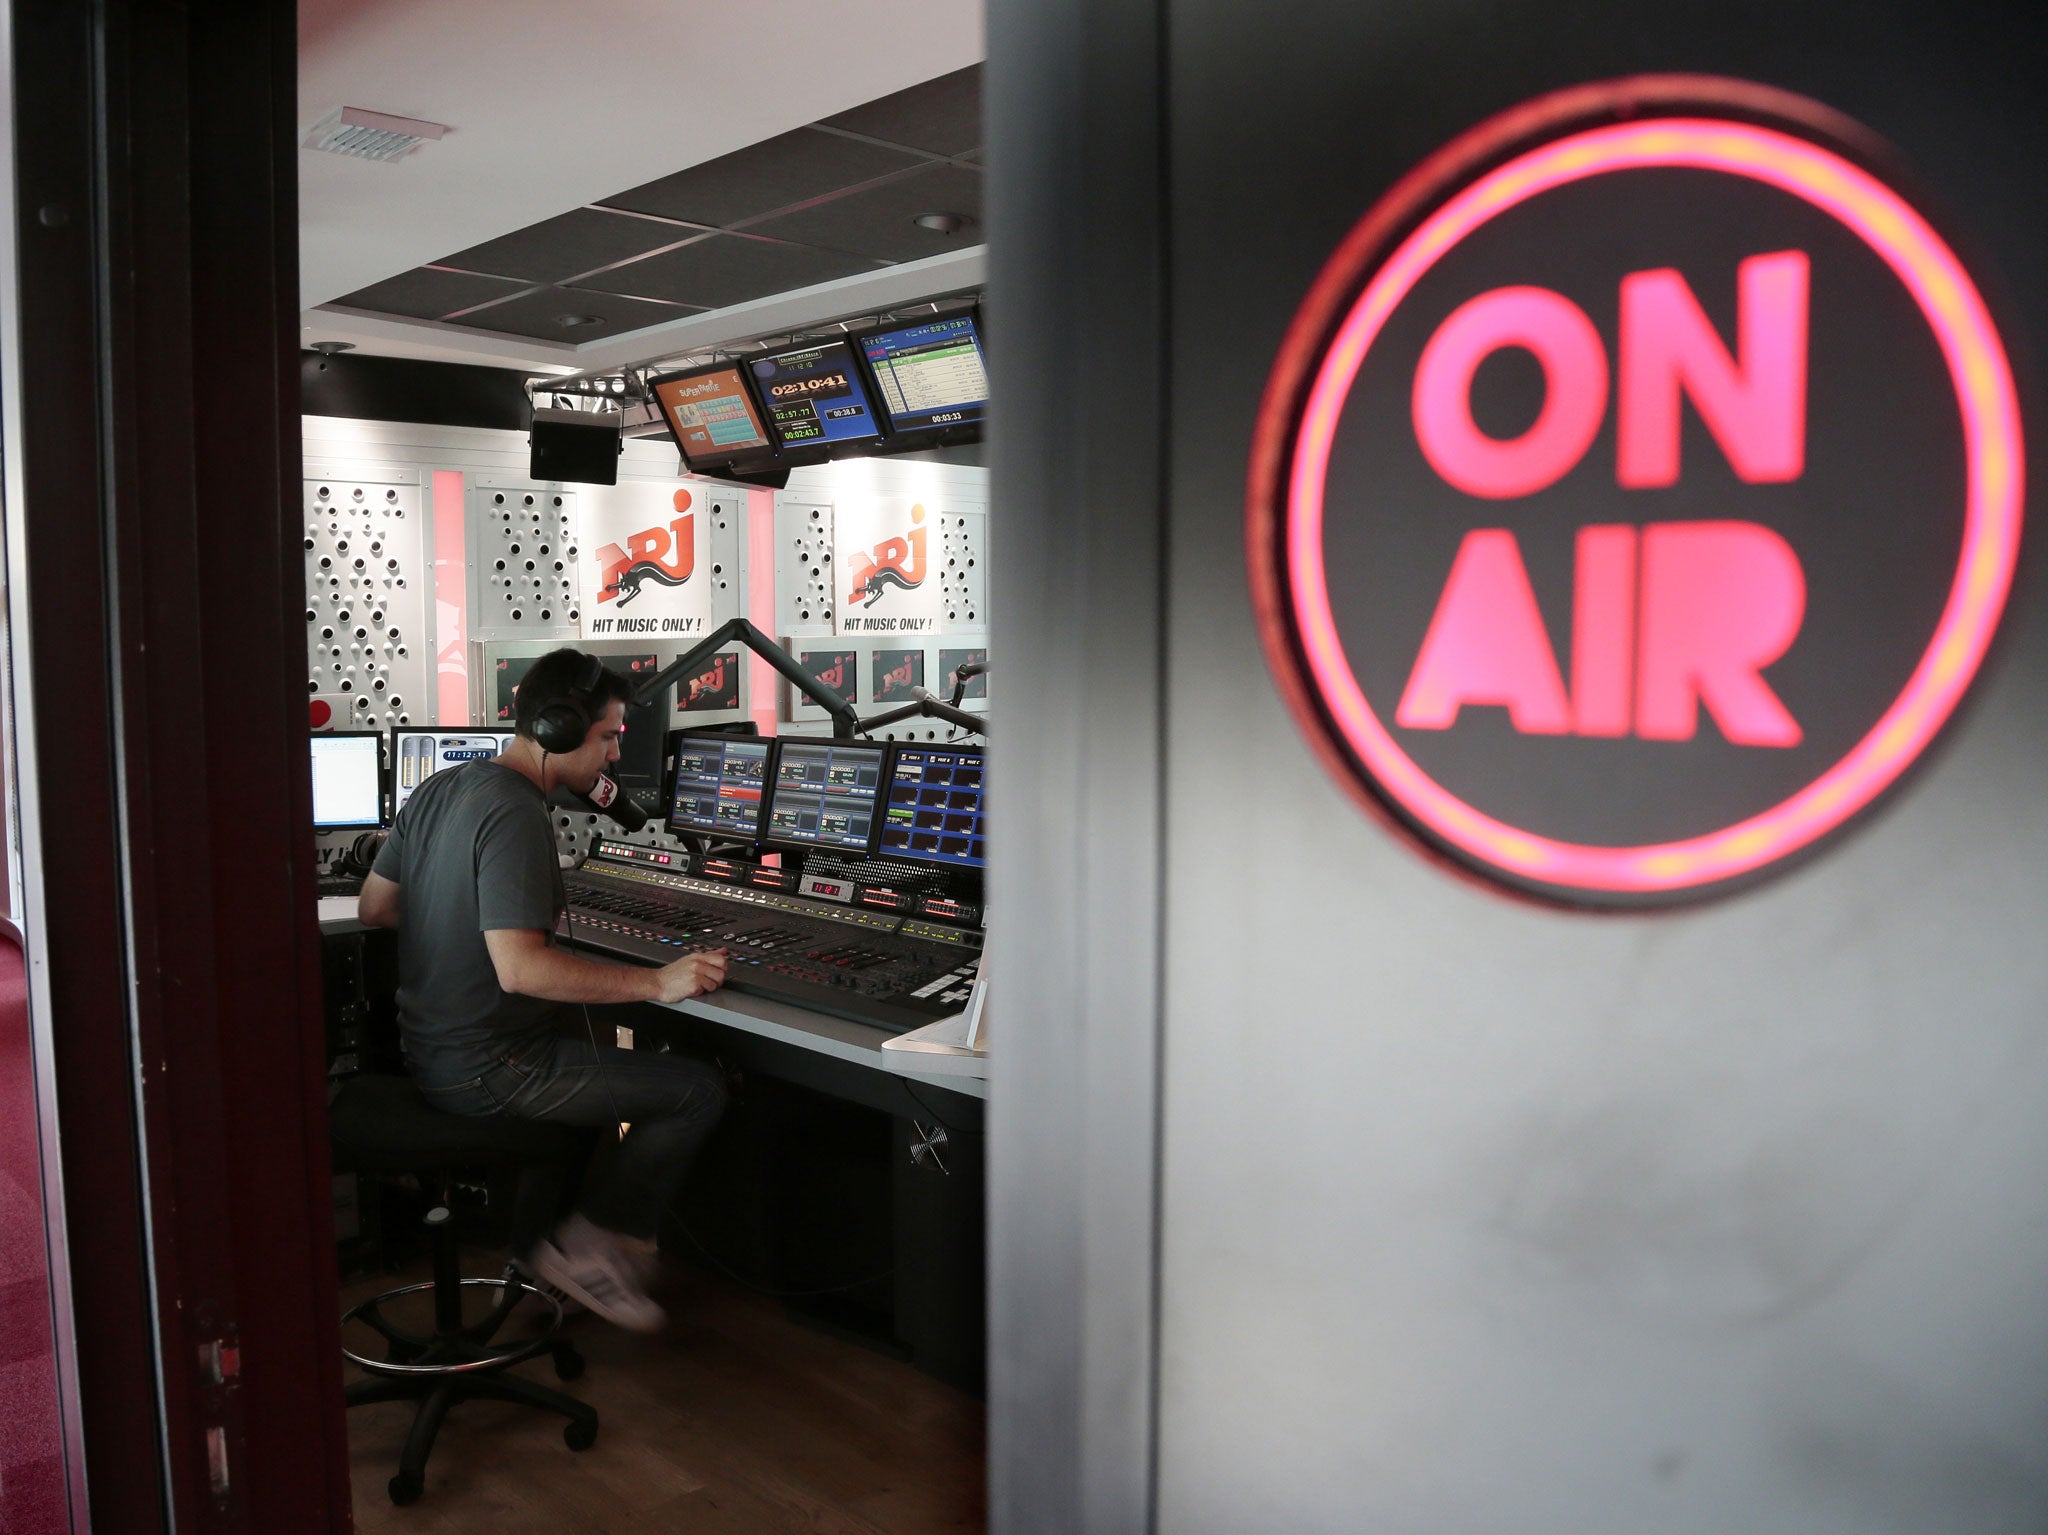 A technician is at work, on July 24, 2012 in Paris, in a studio of the French multimedia NRJ (acronym read as energie in French) group.